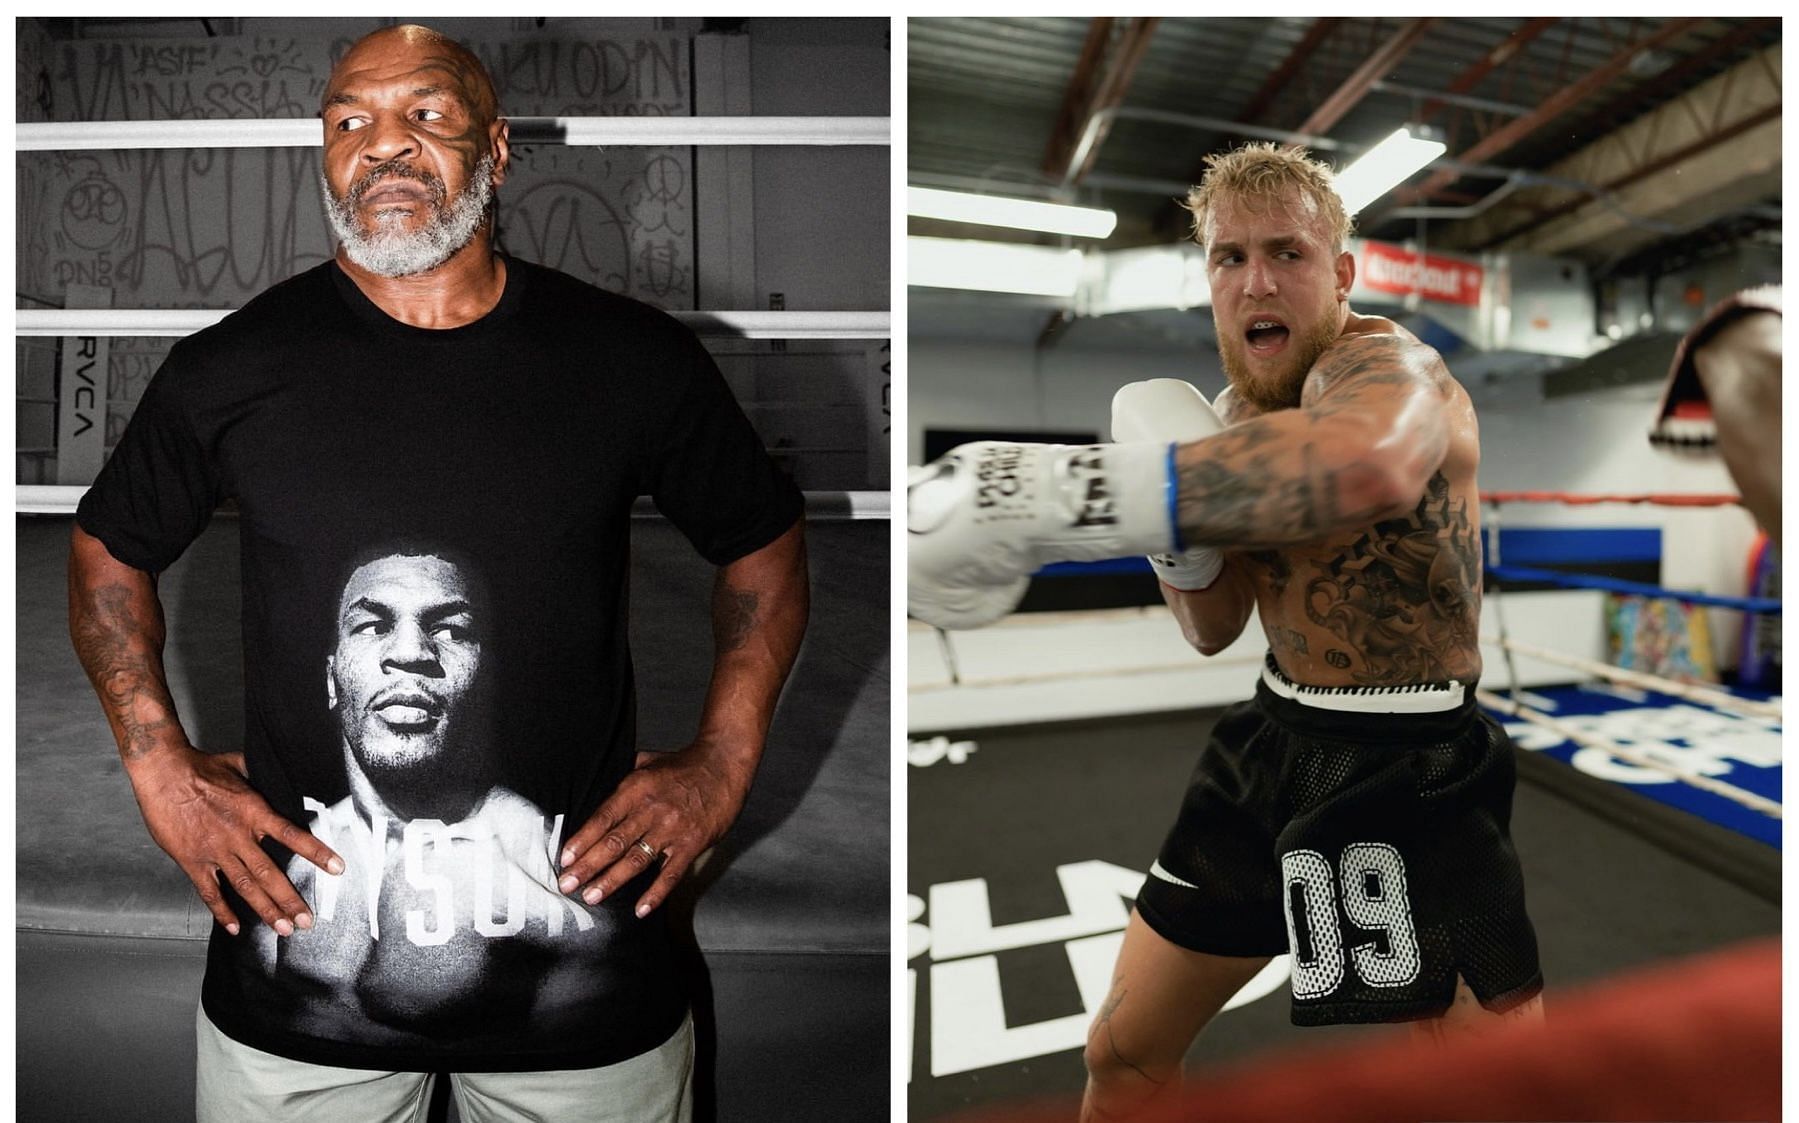 Mike Tyson (left), Jake Paul (right) - Images via @miketyson and @jakepaul on Instagram